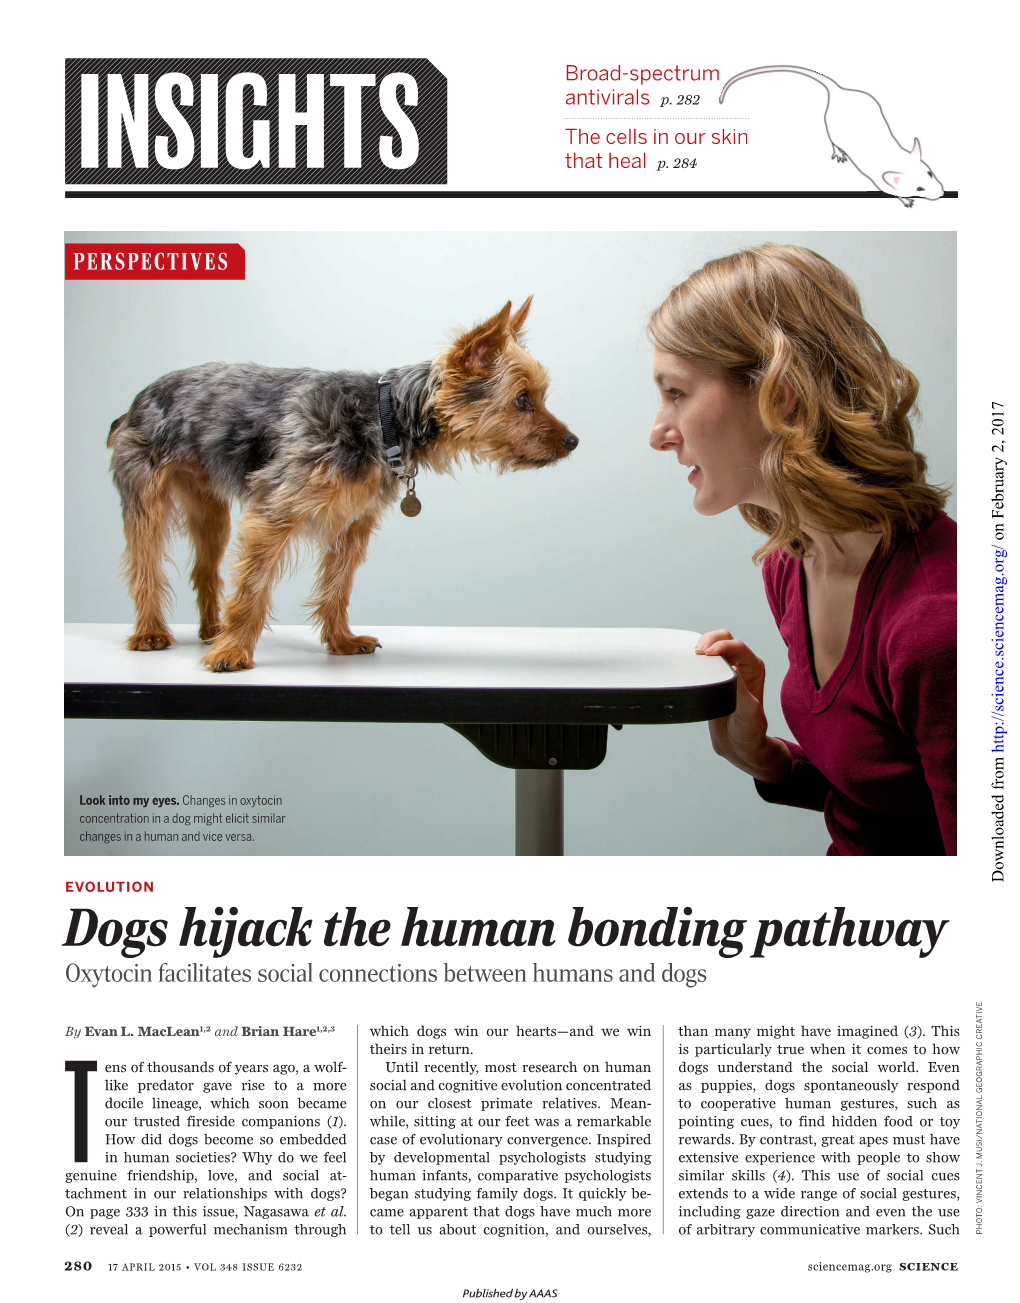 Dogs Hijack the Human Bonding Pathway Oxytocin Facilitates Social Connections Between Humans and Dogs